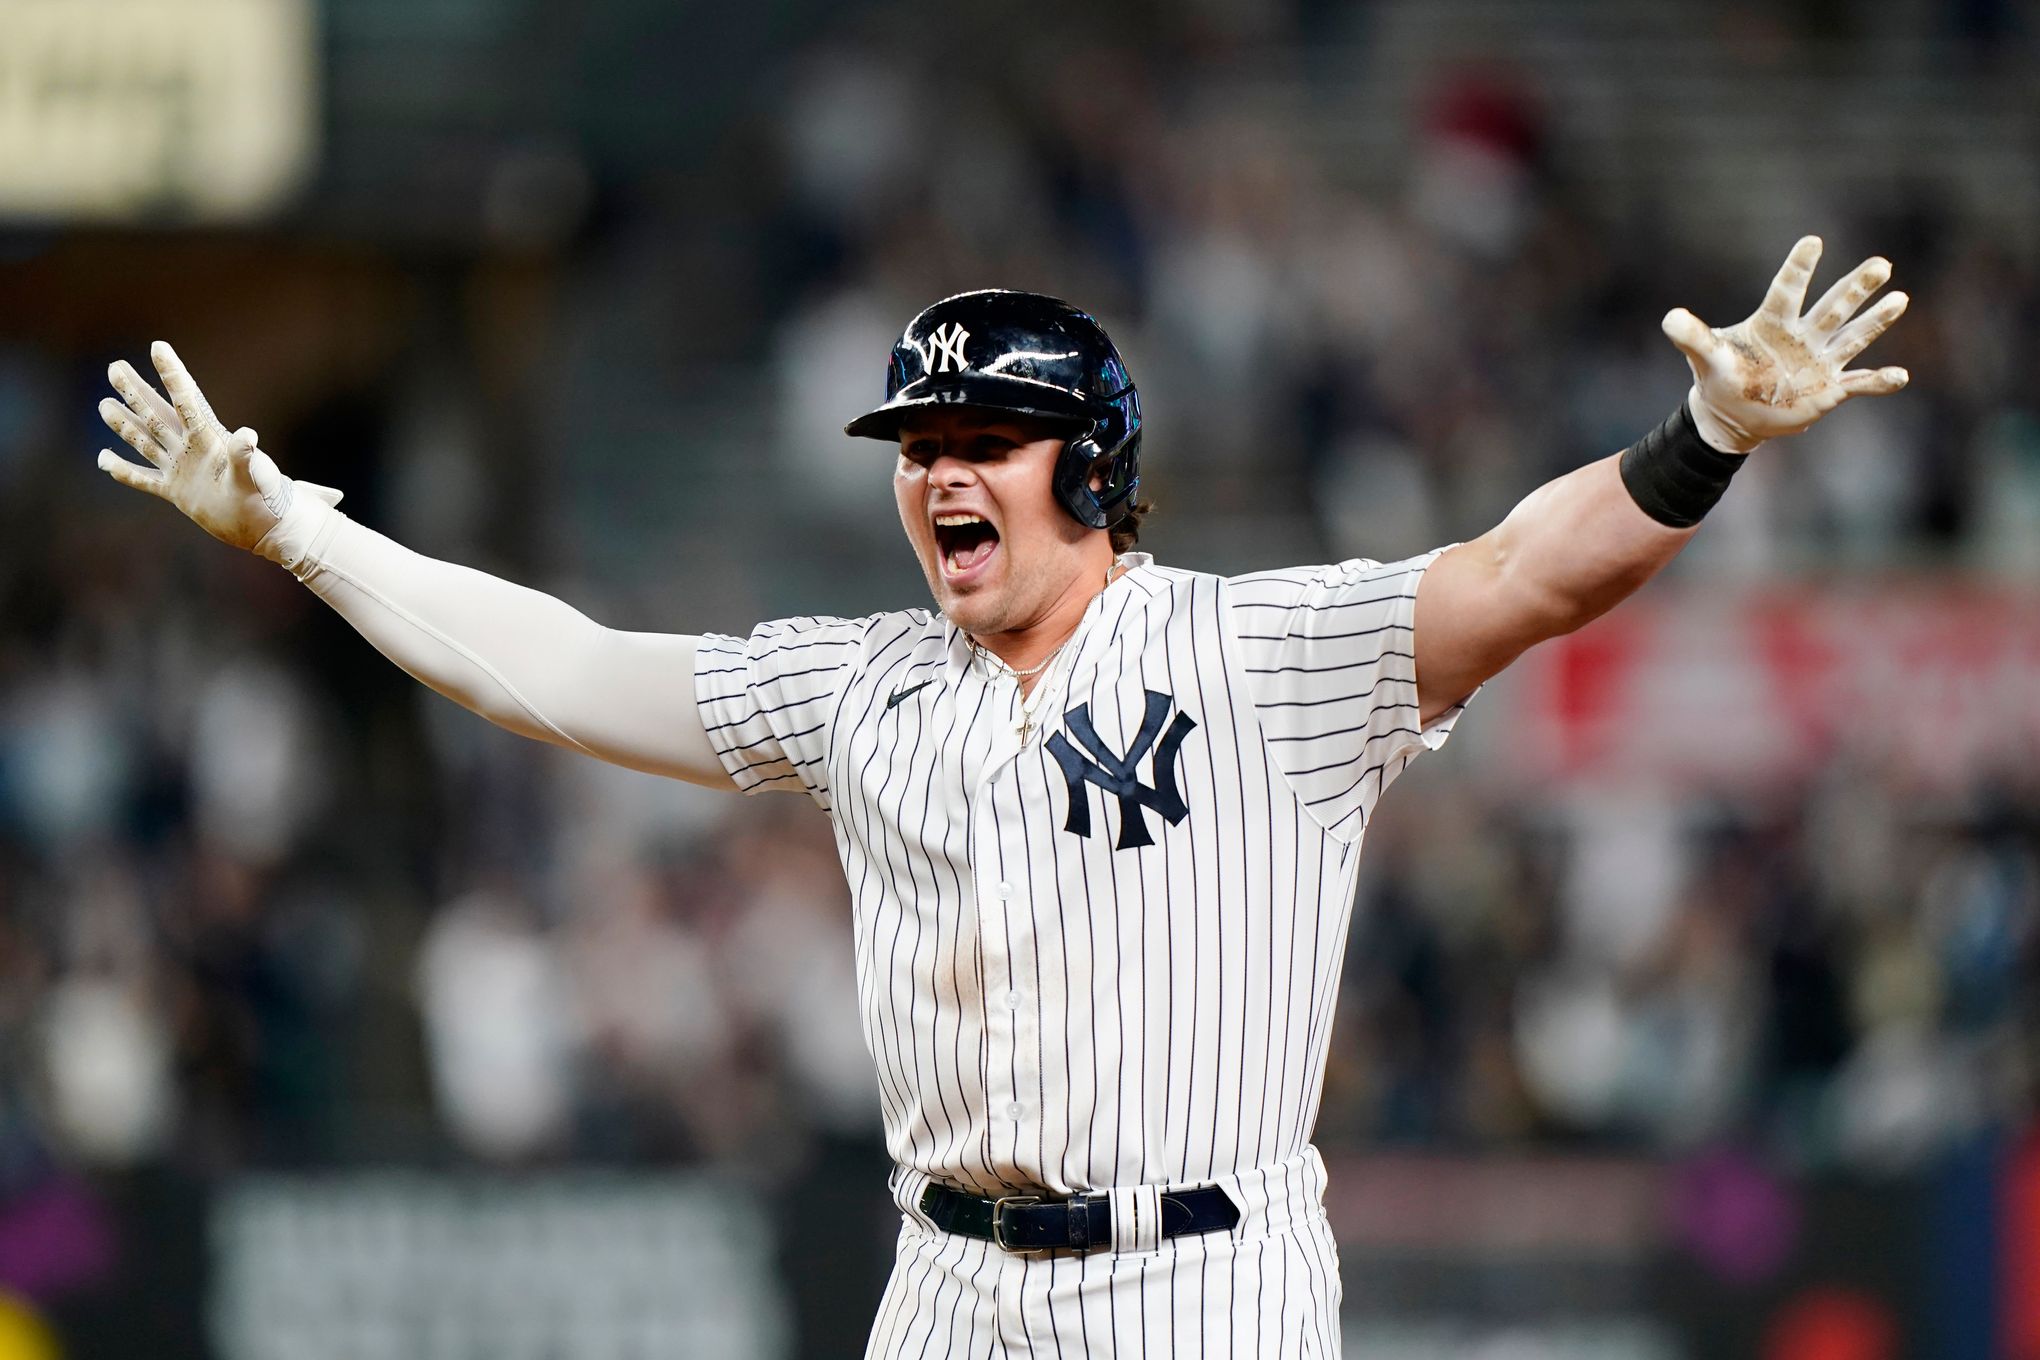 LeMahieu and Stanton homer as the Yankees beat the Royals 5-2